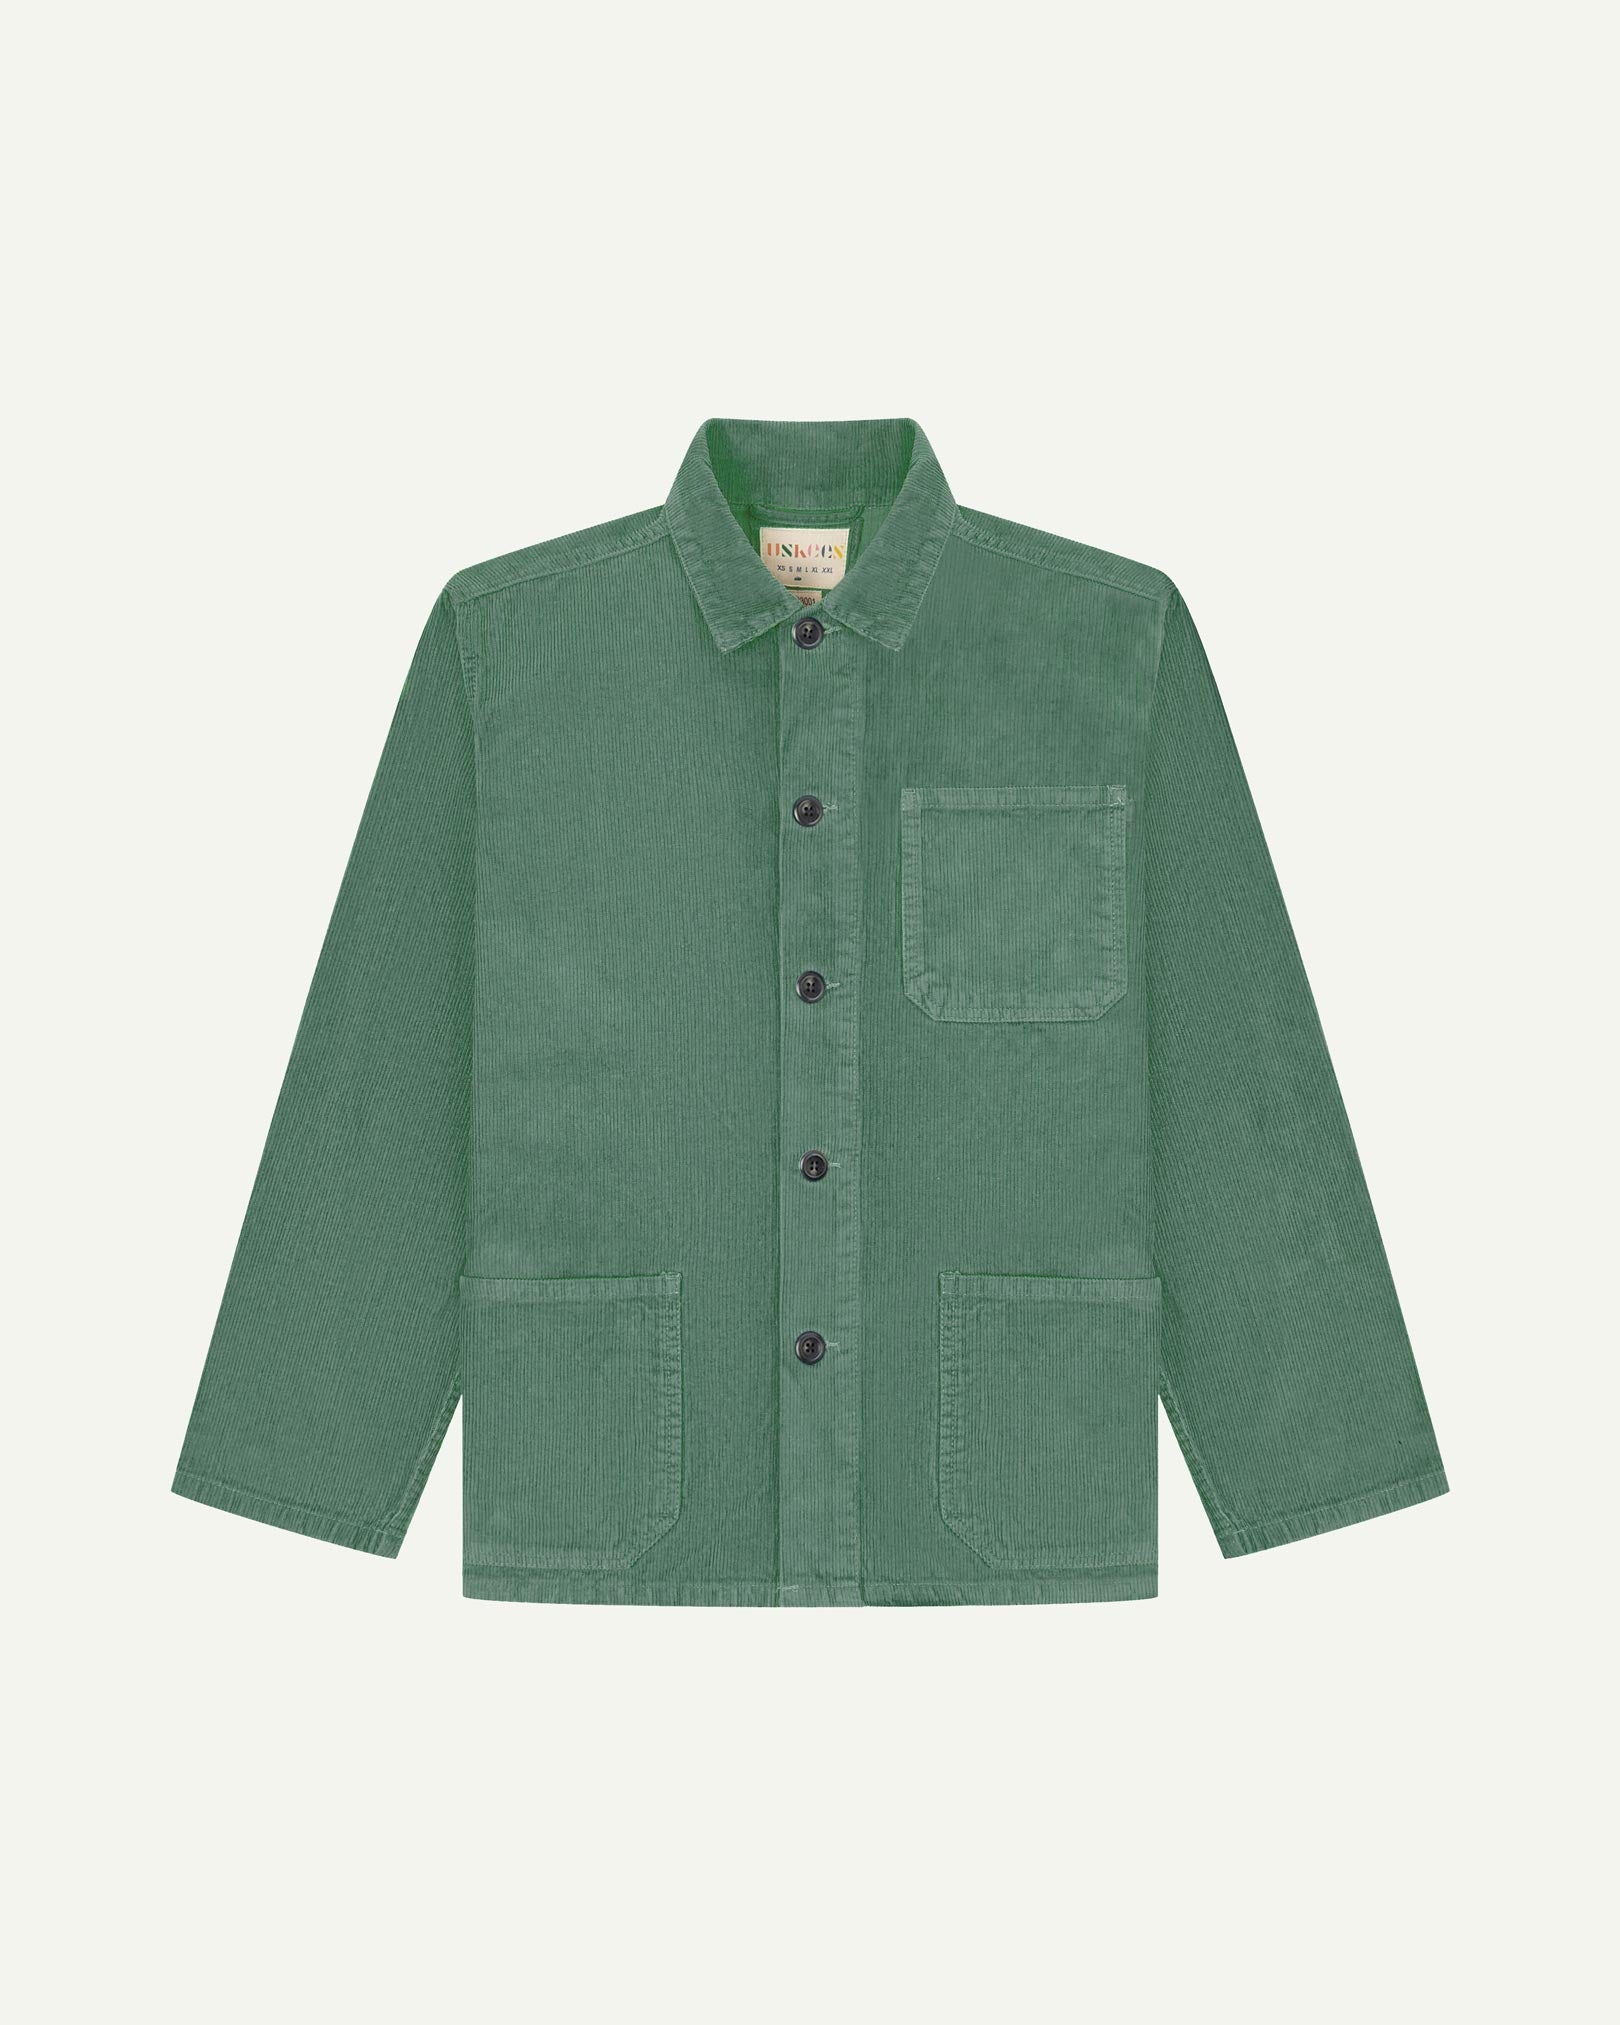 Front flat shot of light green, buttoned corduroy overshirt. Clear view of chest and hip pockets, corozo buttons and Uskees branding label.